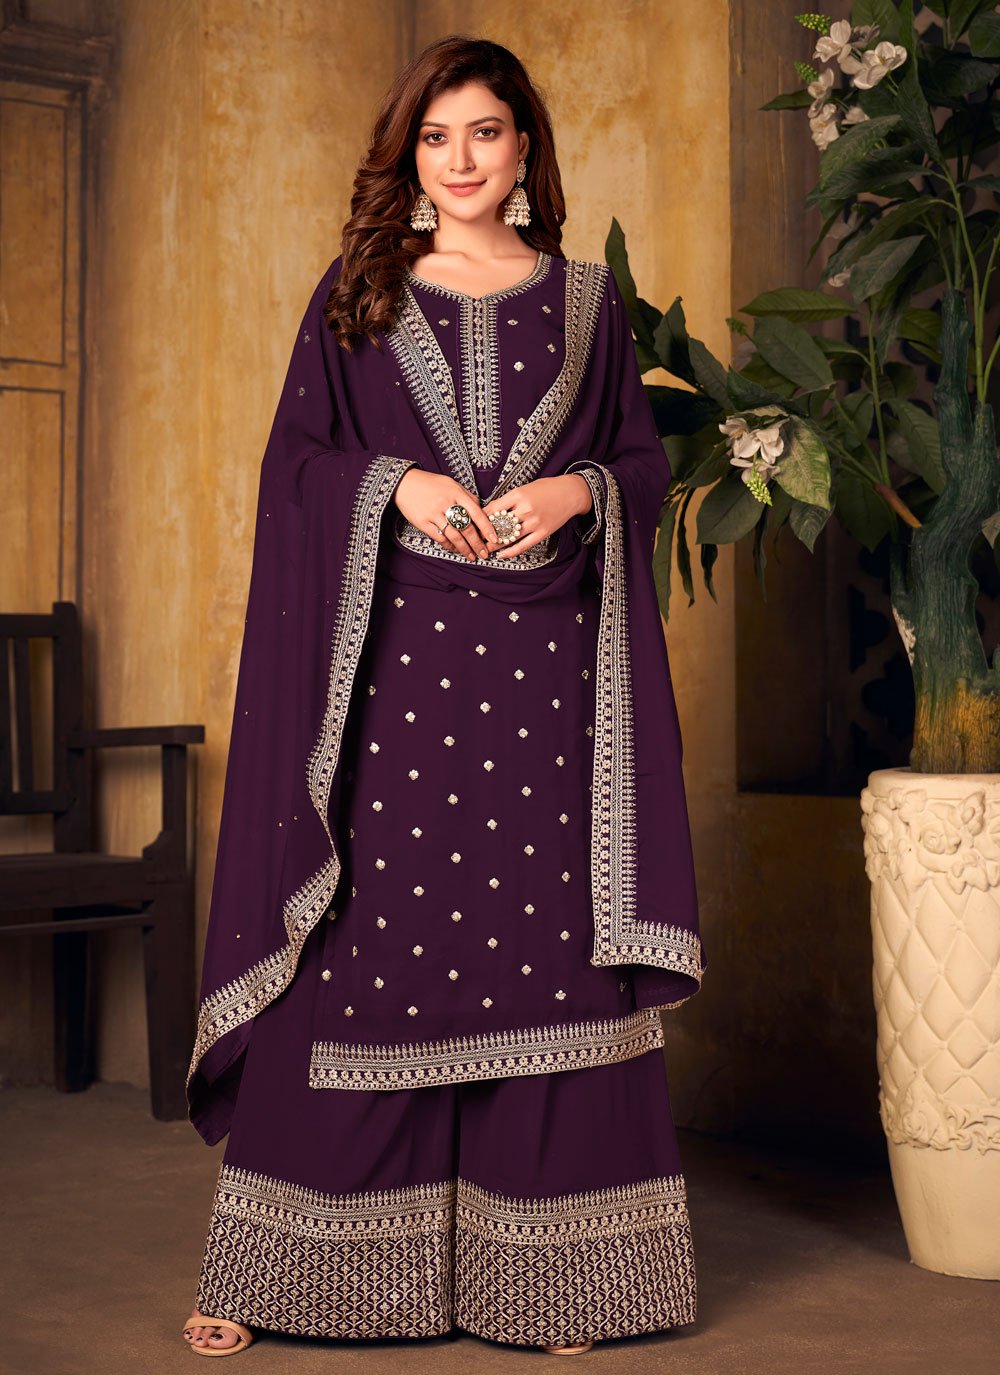 Purple Designer Palazzo Salwar Suit in Faux Georgette with Embroidered